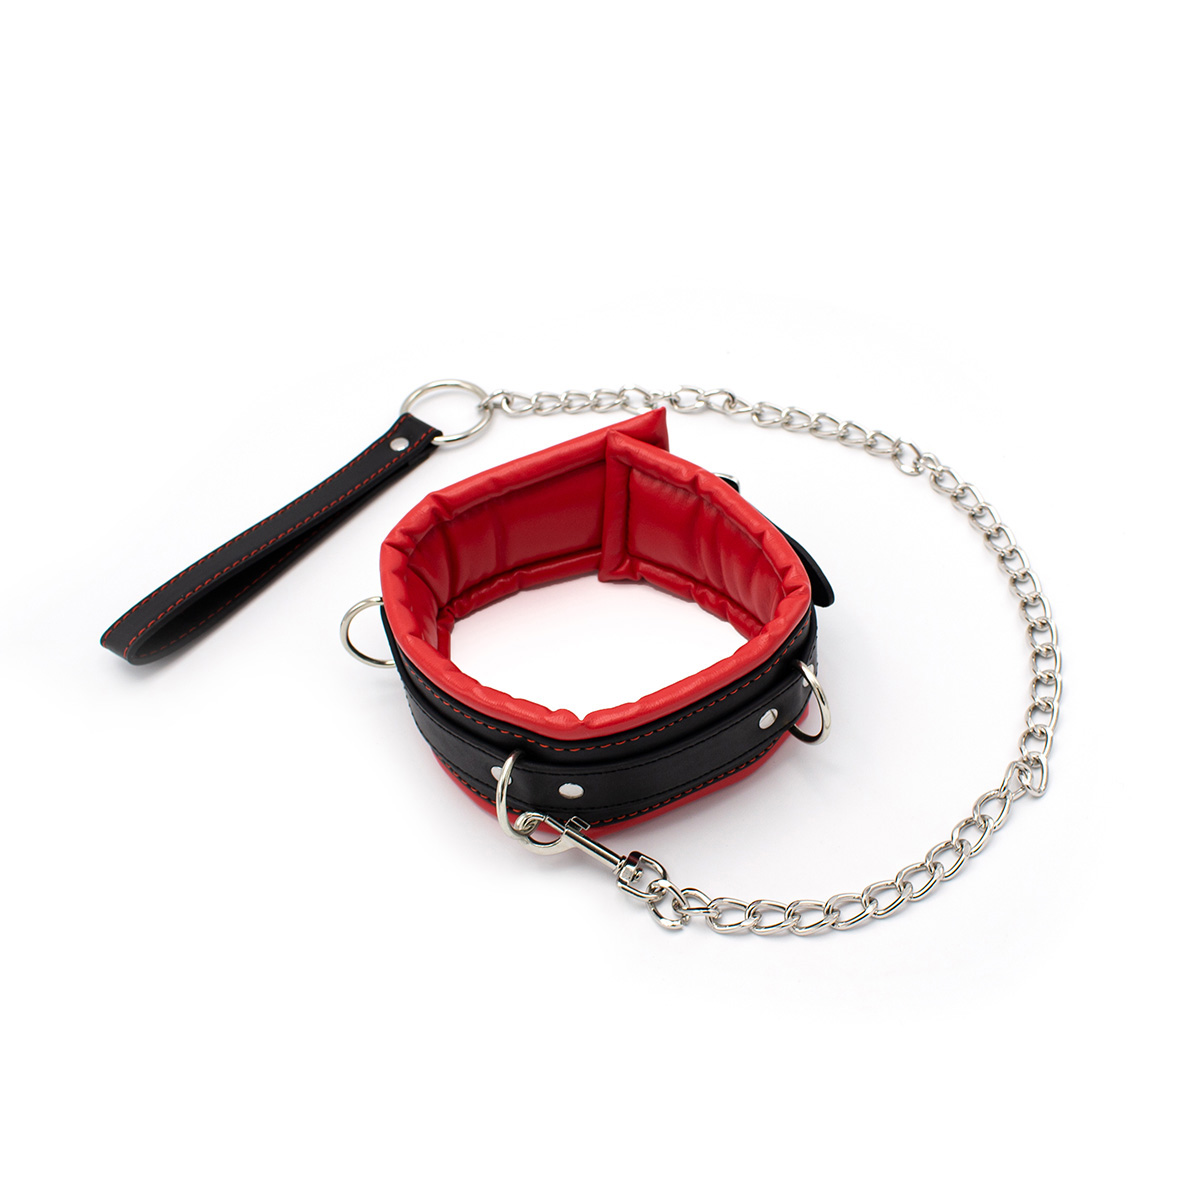 Collar-Red-Black-with-Leash-OPR-3010093-3